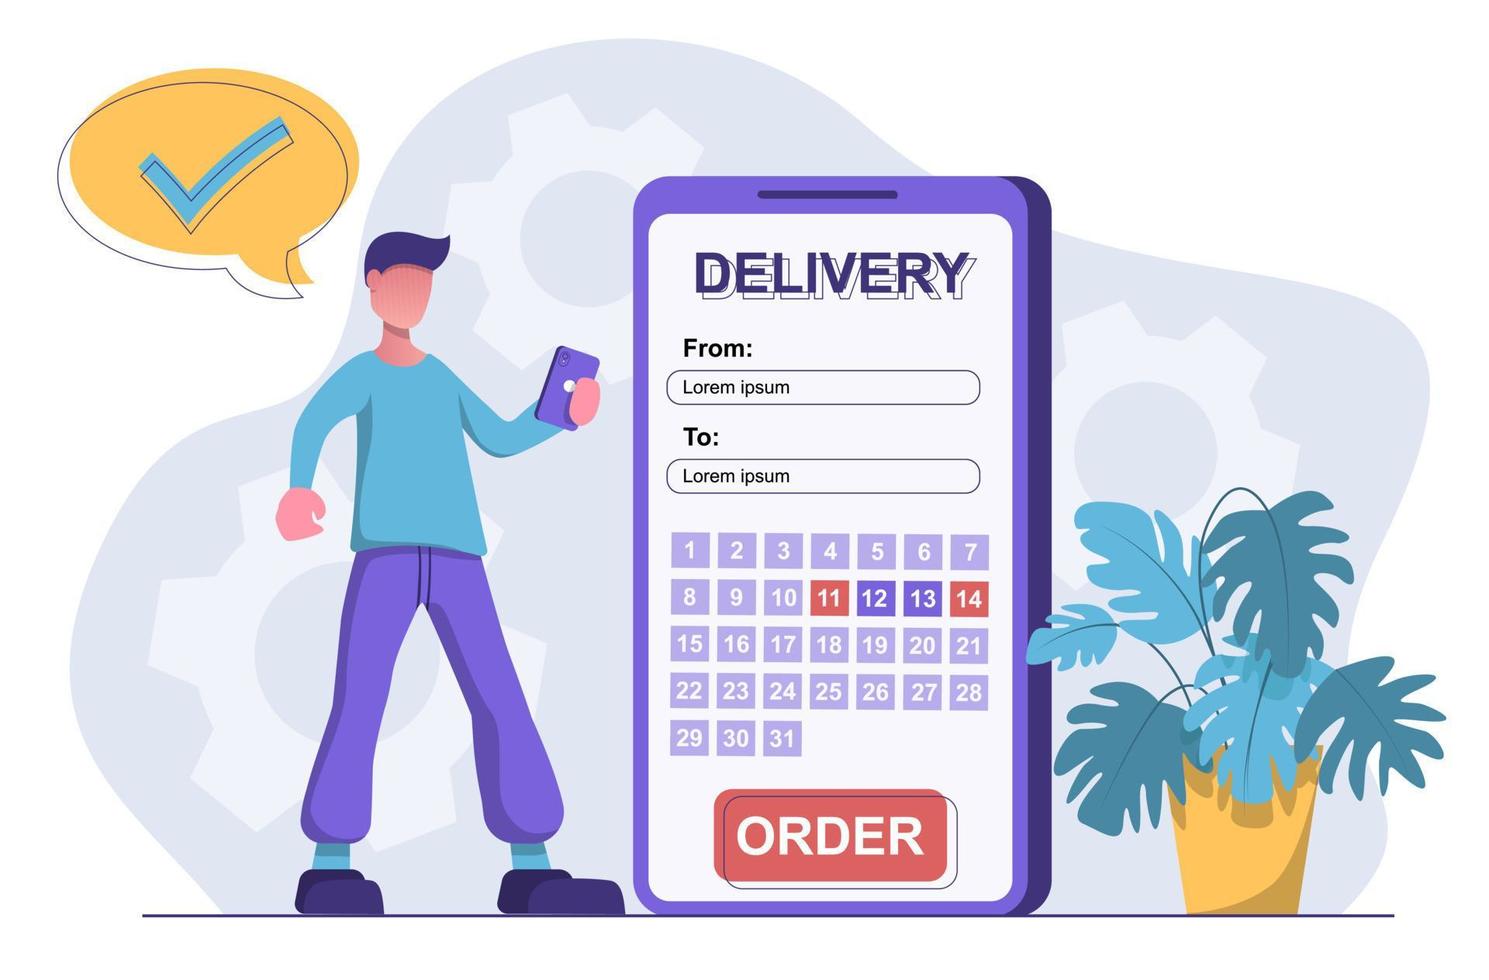 Delivery Service. A man makes a delivery via a mobile app vector